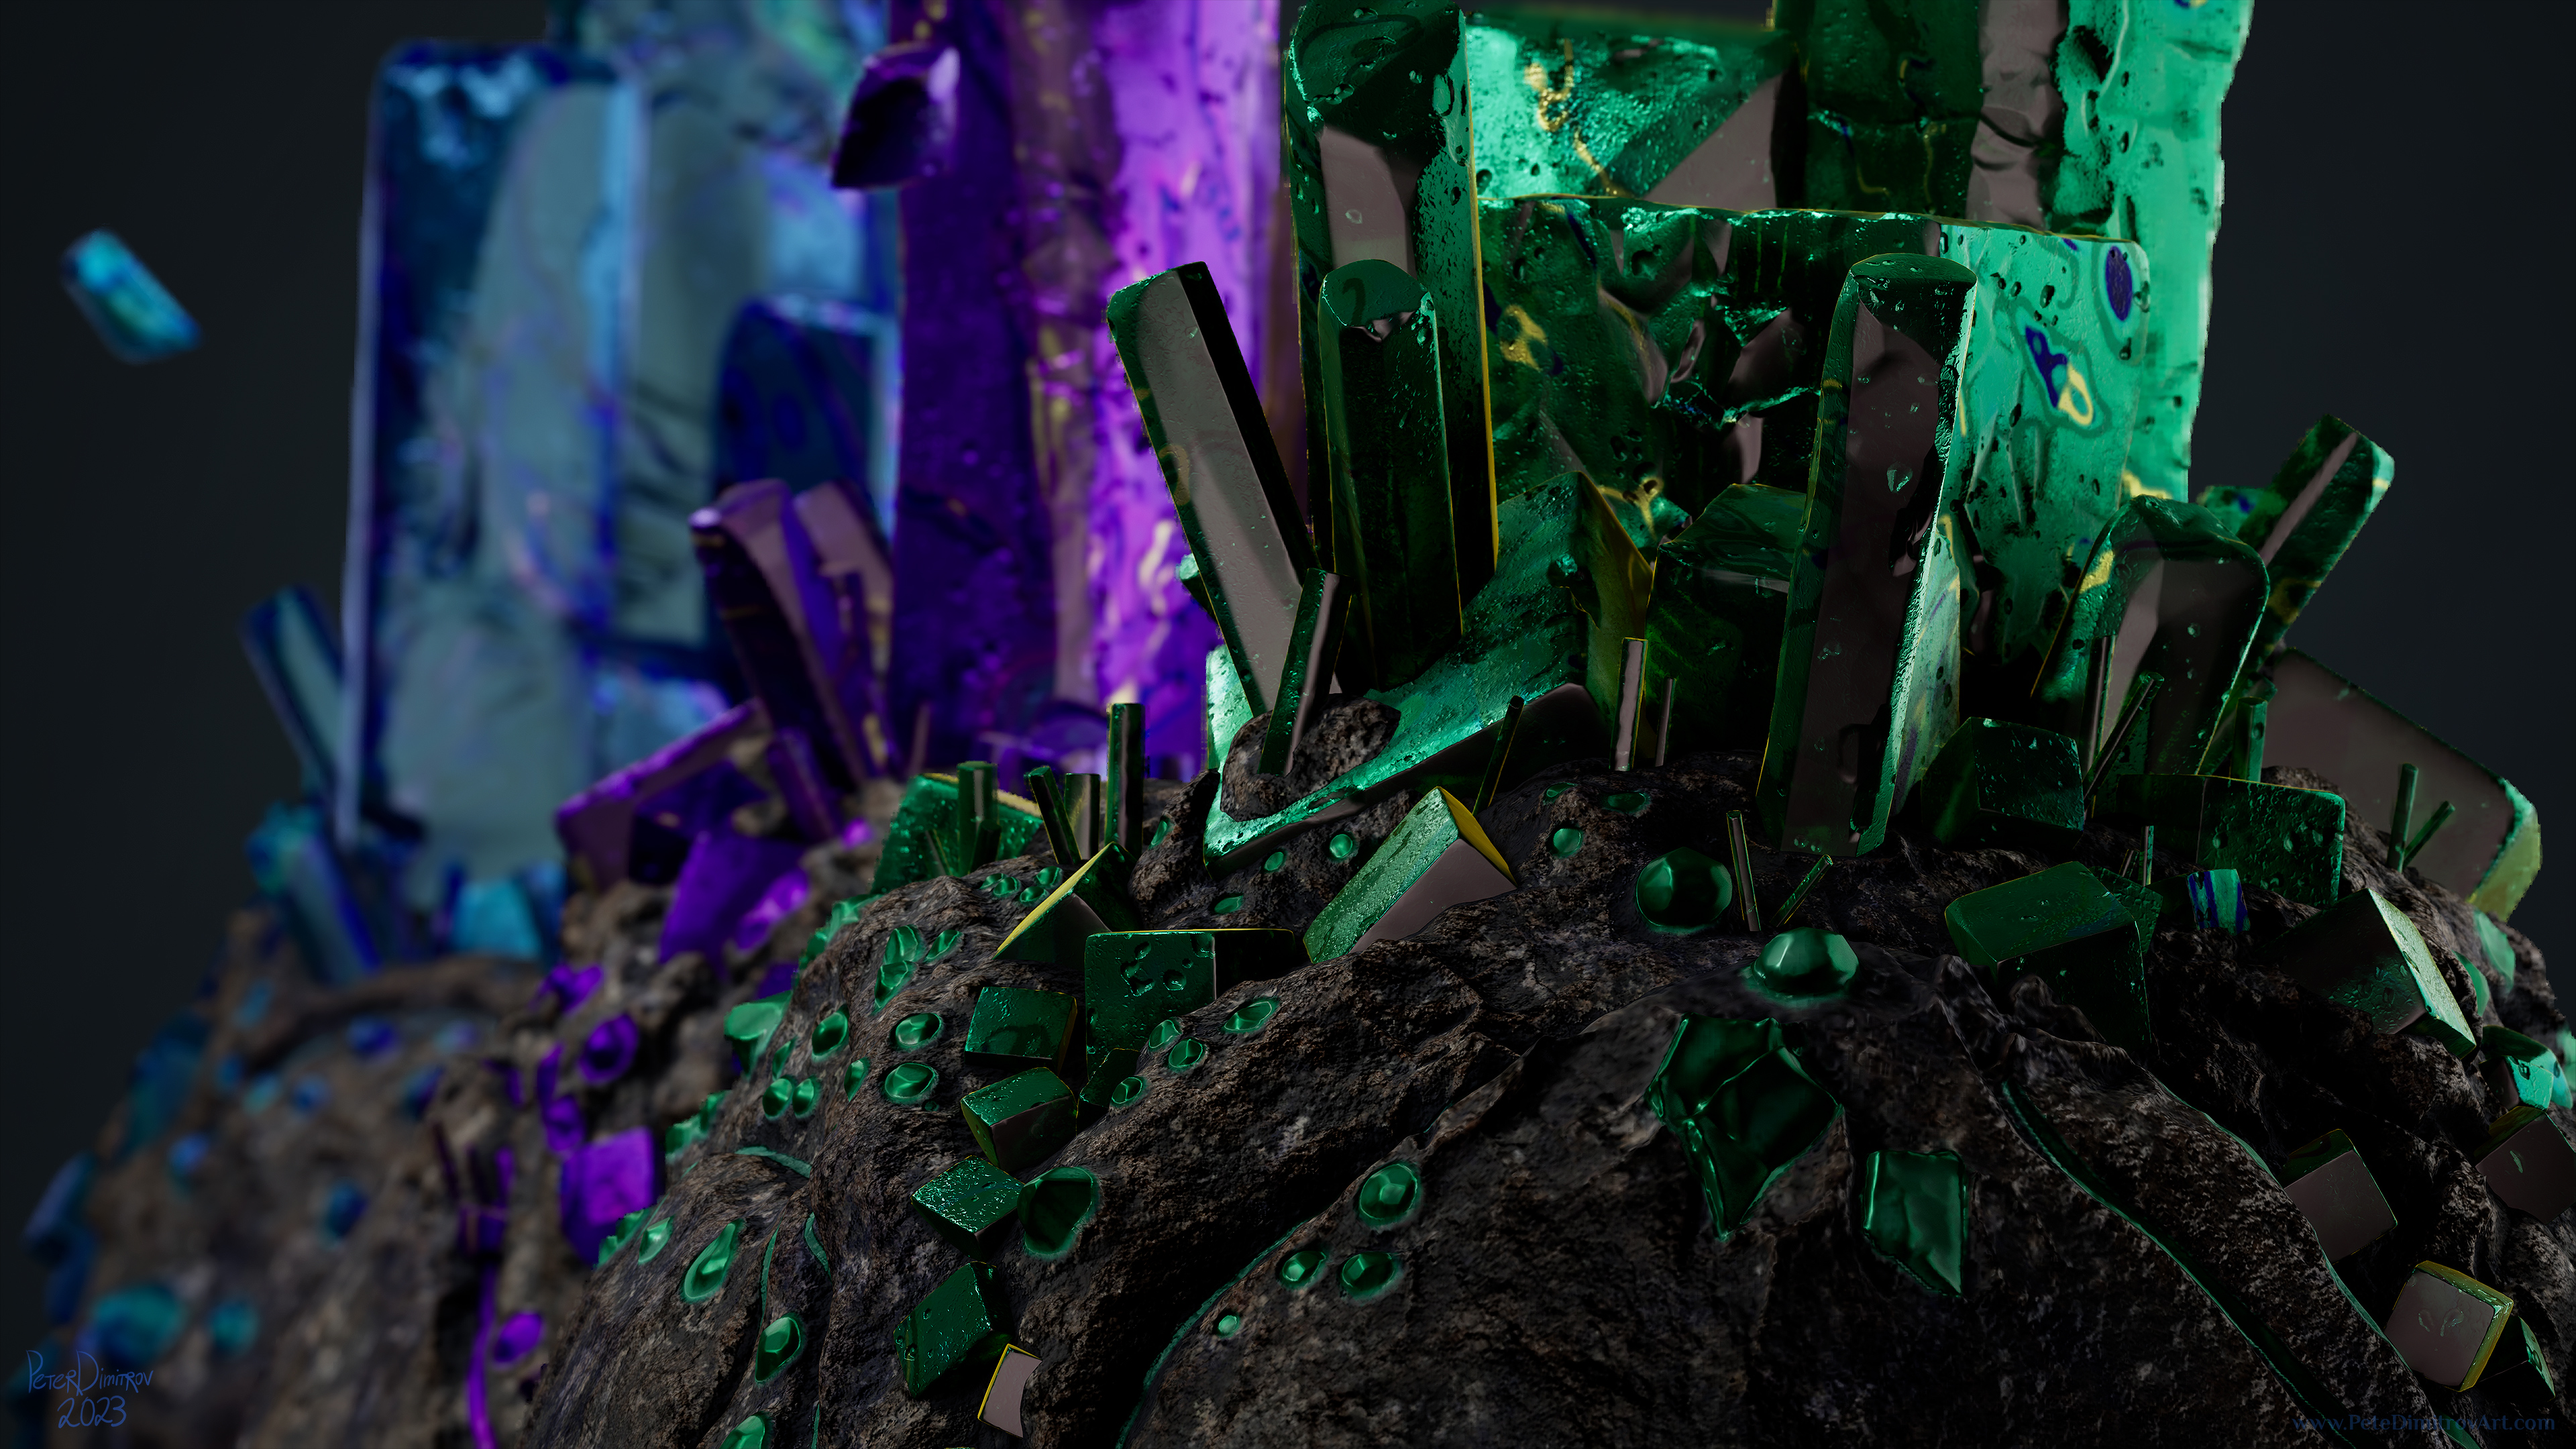 Close up screenshot. Shows rendering of the crystal prop, duplicated three times. In the foreground, in a cinematic focus, is the green version of it. Behind is purple and blue which are blurred in a dramatic way.